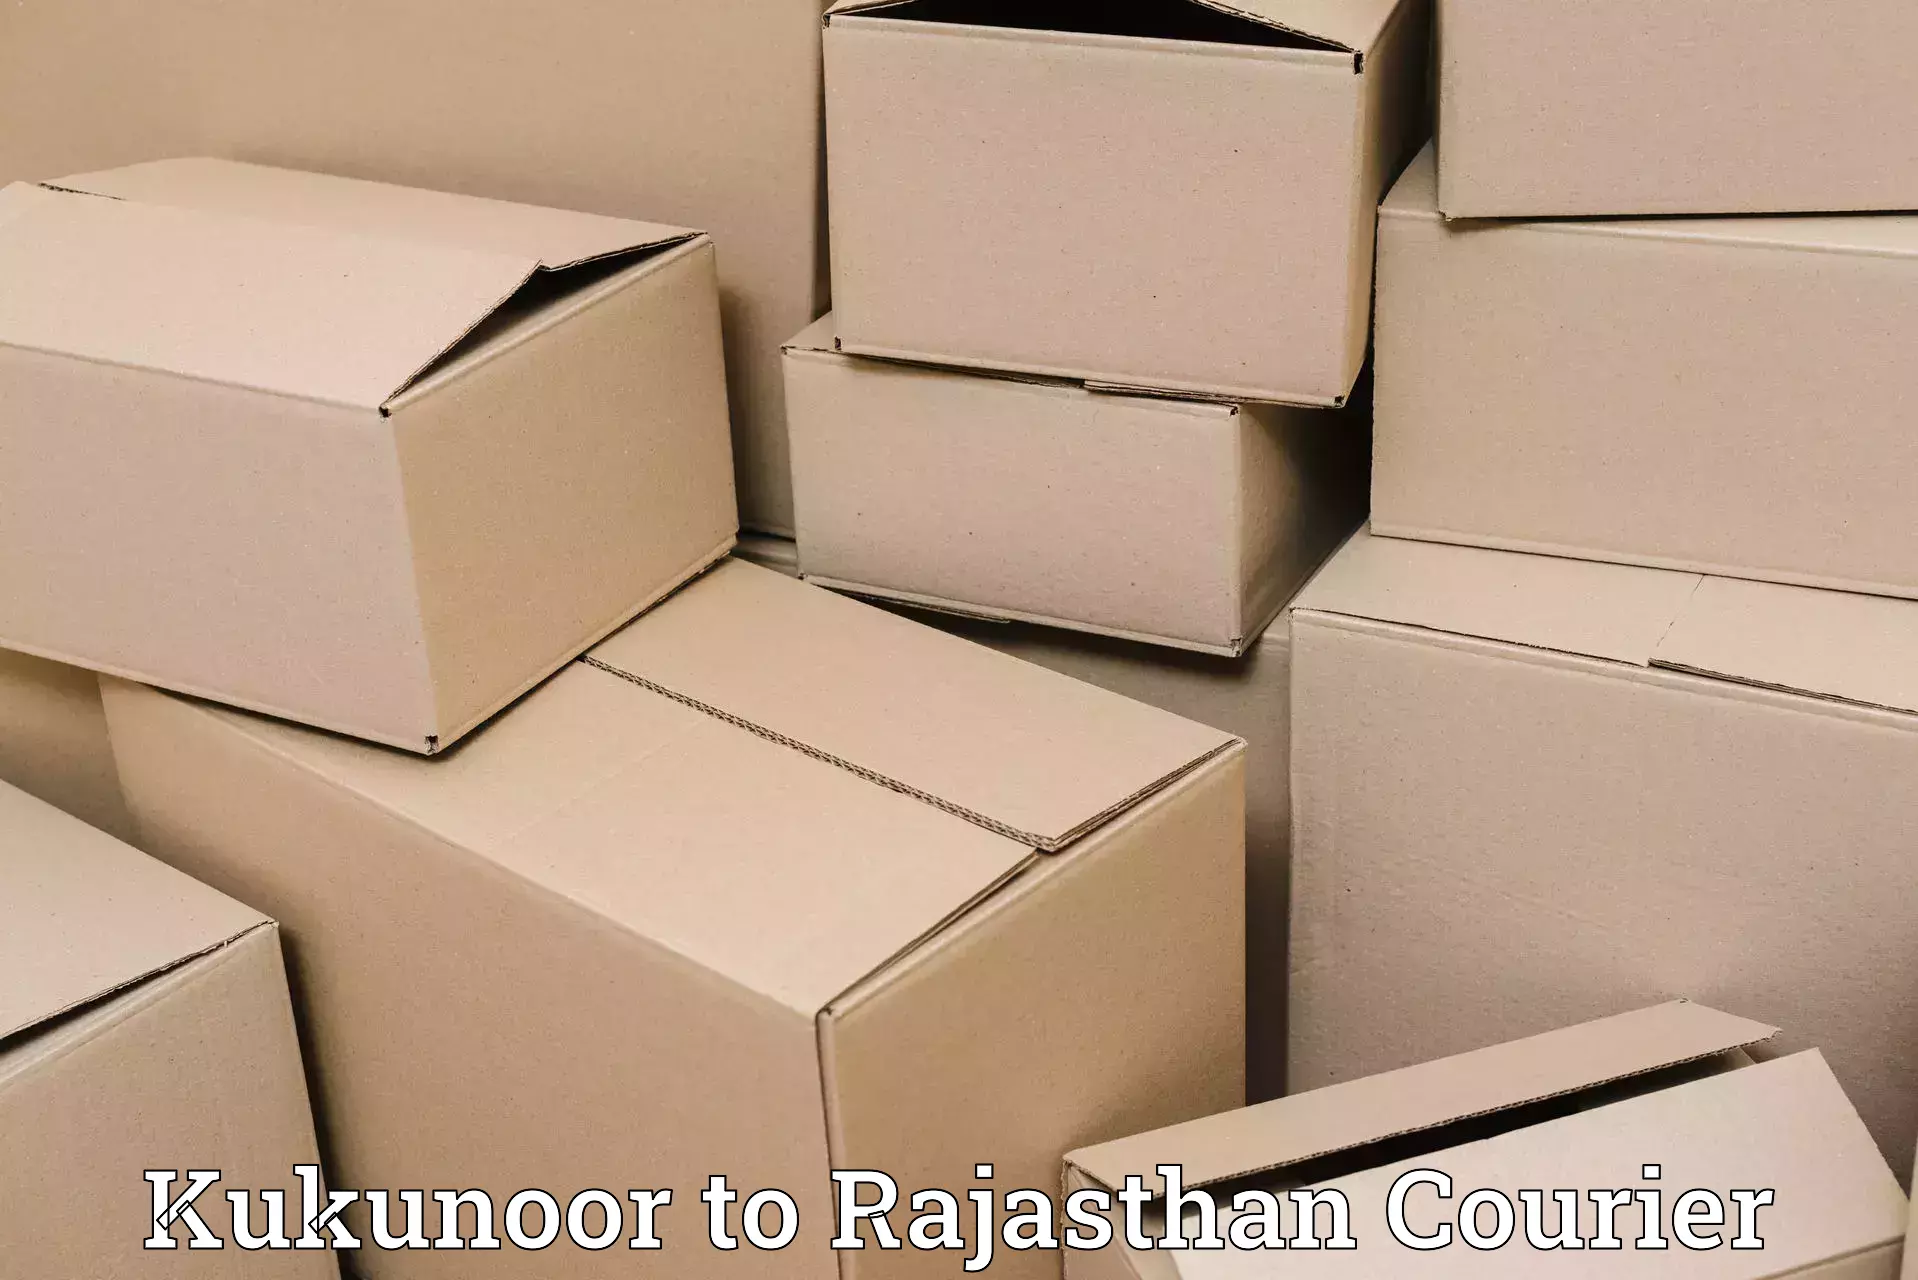 On-call courier service Kukunoor to Yeswanthapur